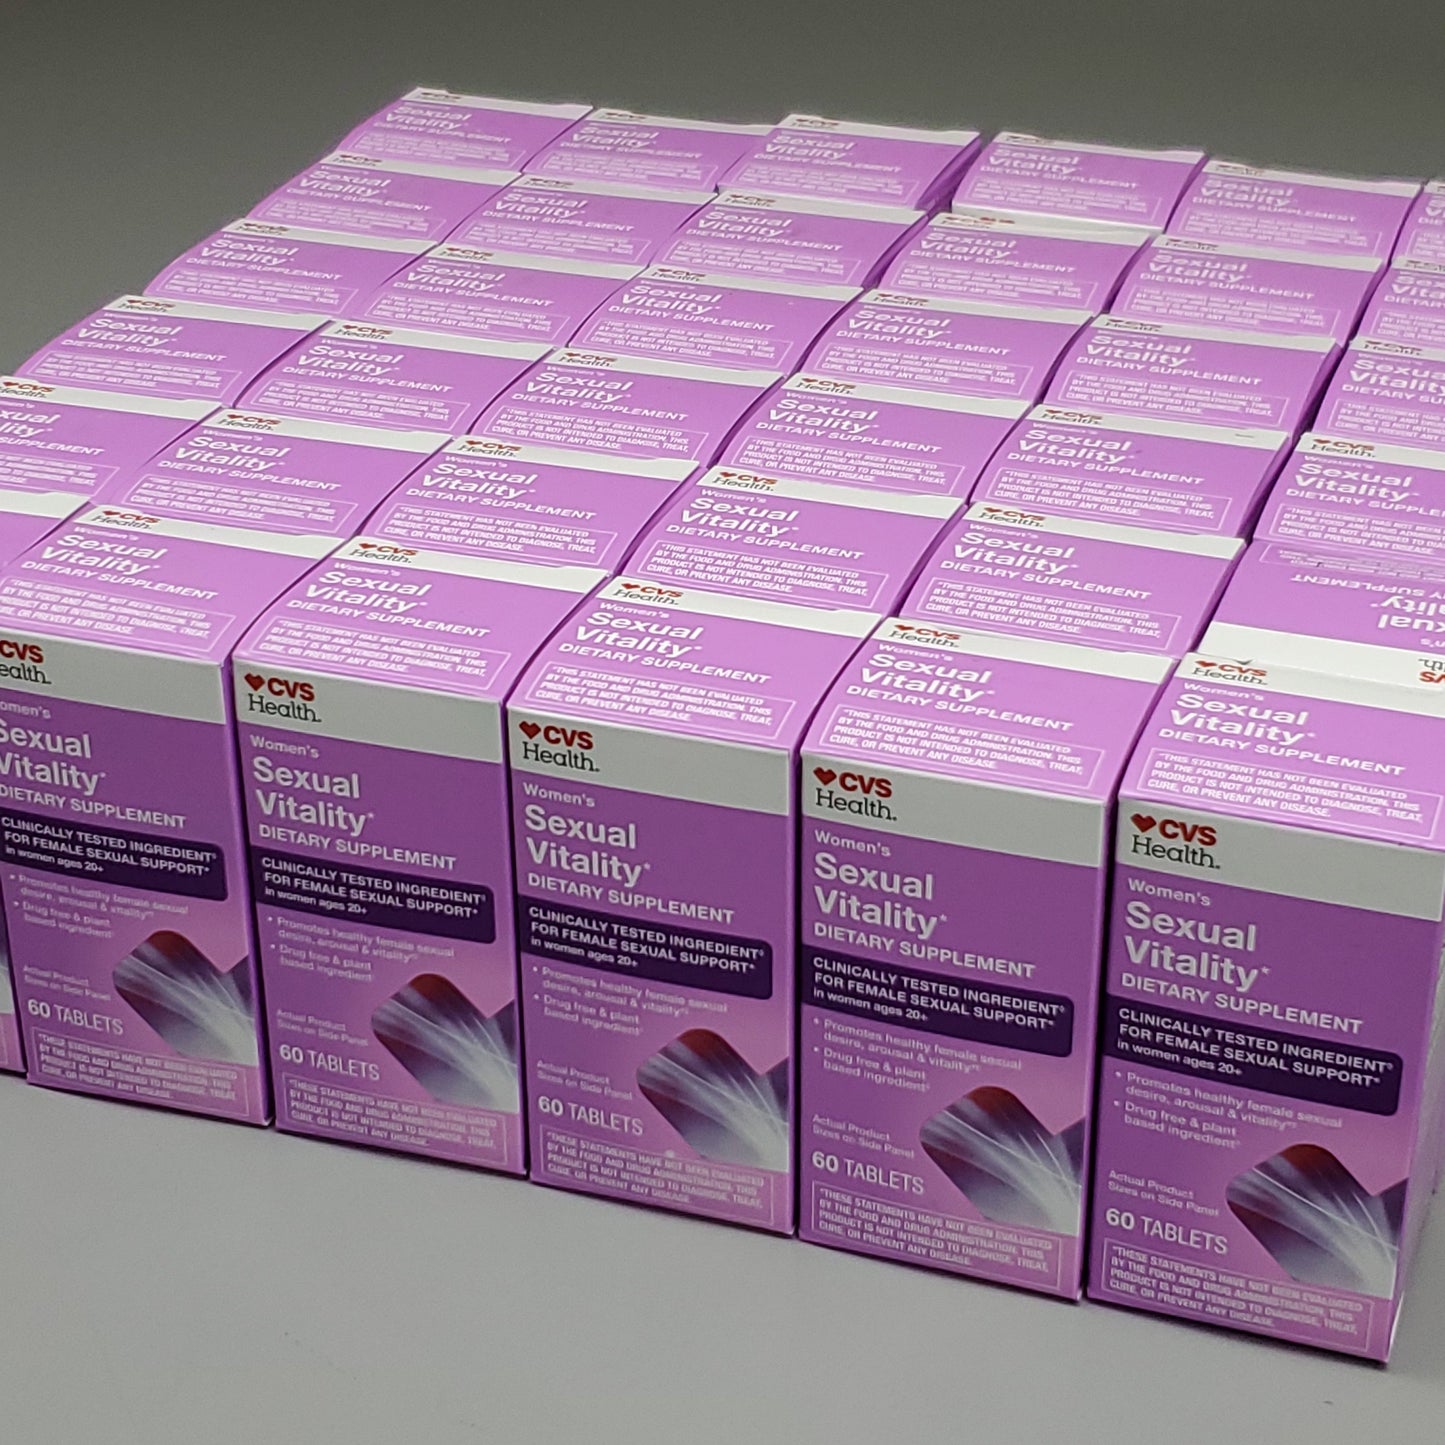 ZA@ 36 Bottles! CVS Women's Sexual Vitality Dietary Supplement 60 Count (03/24) A